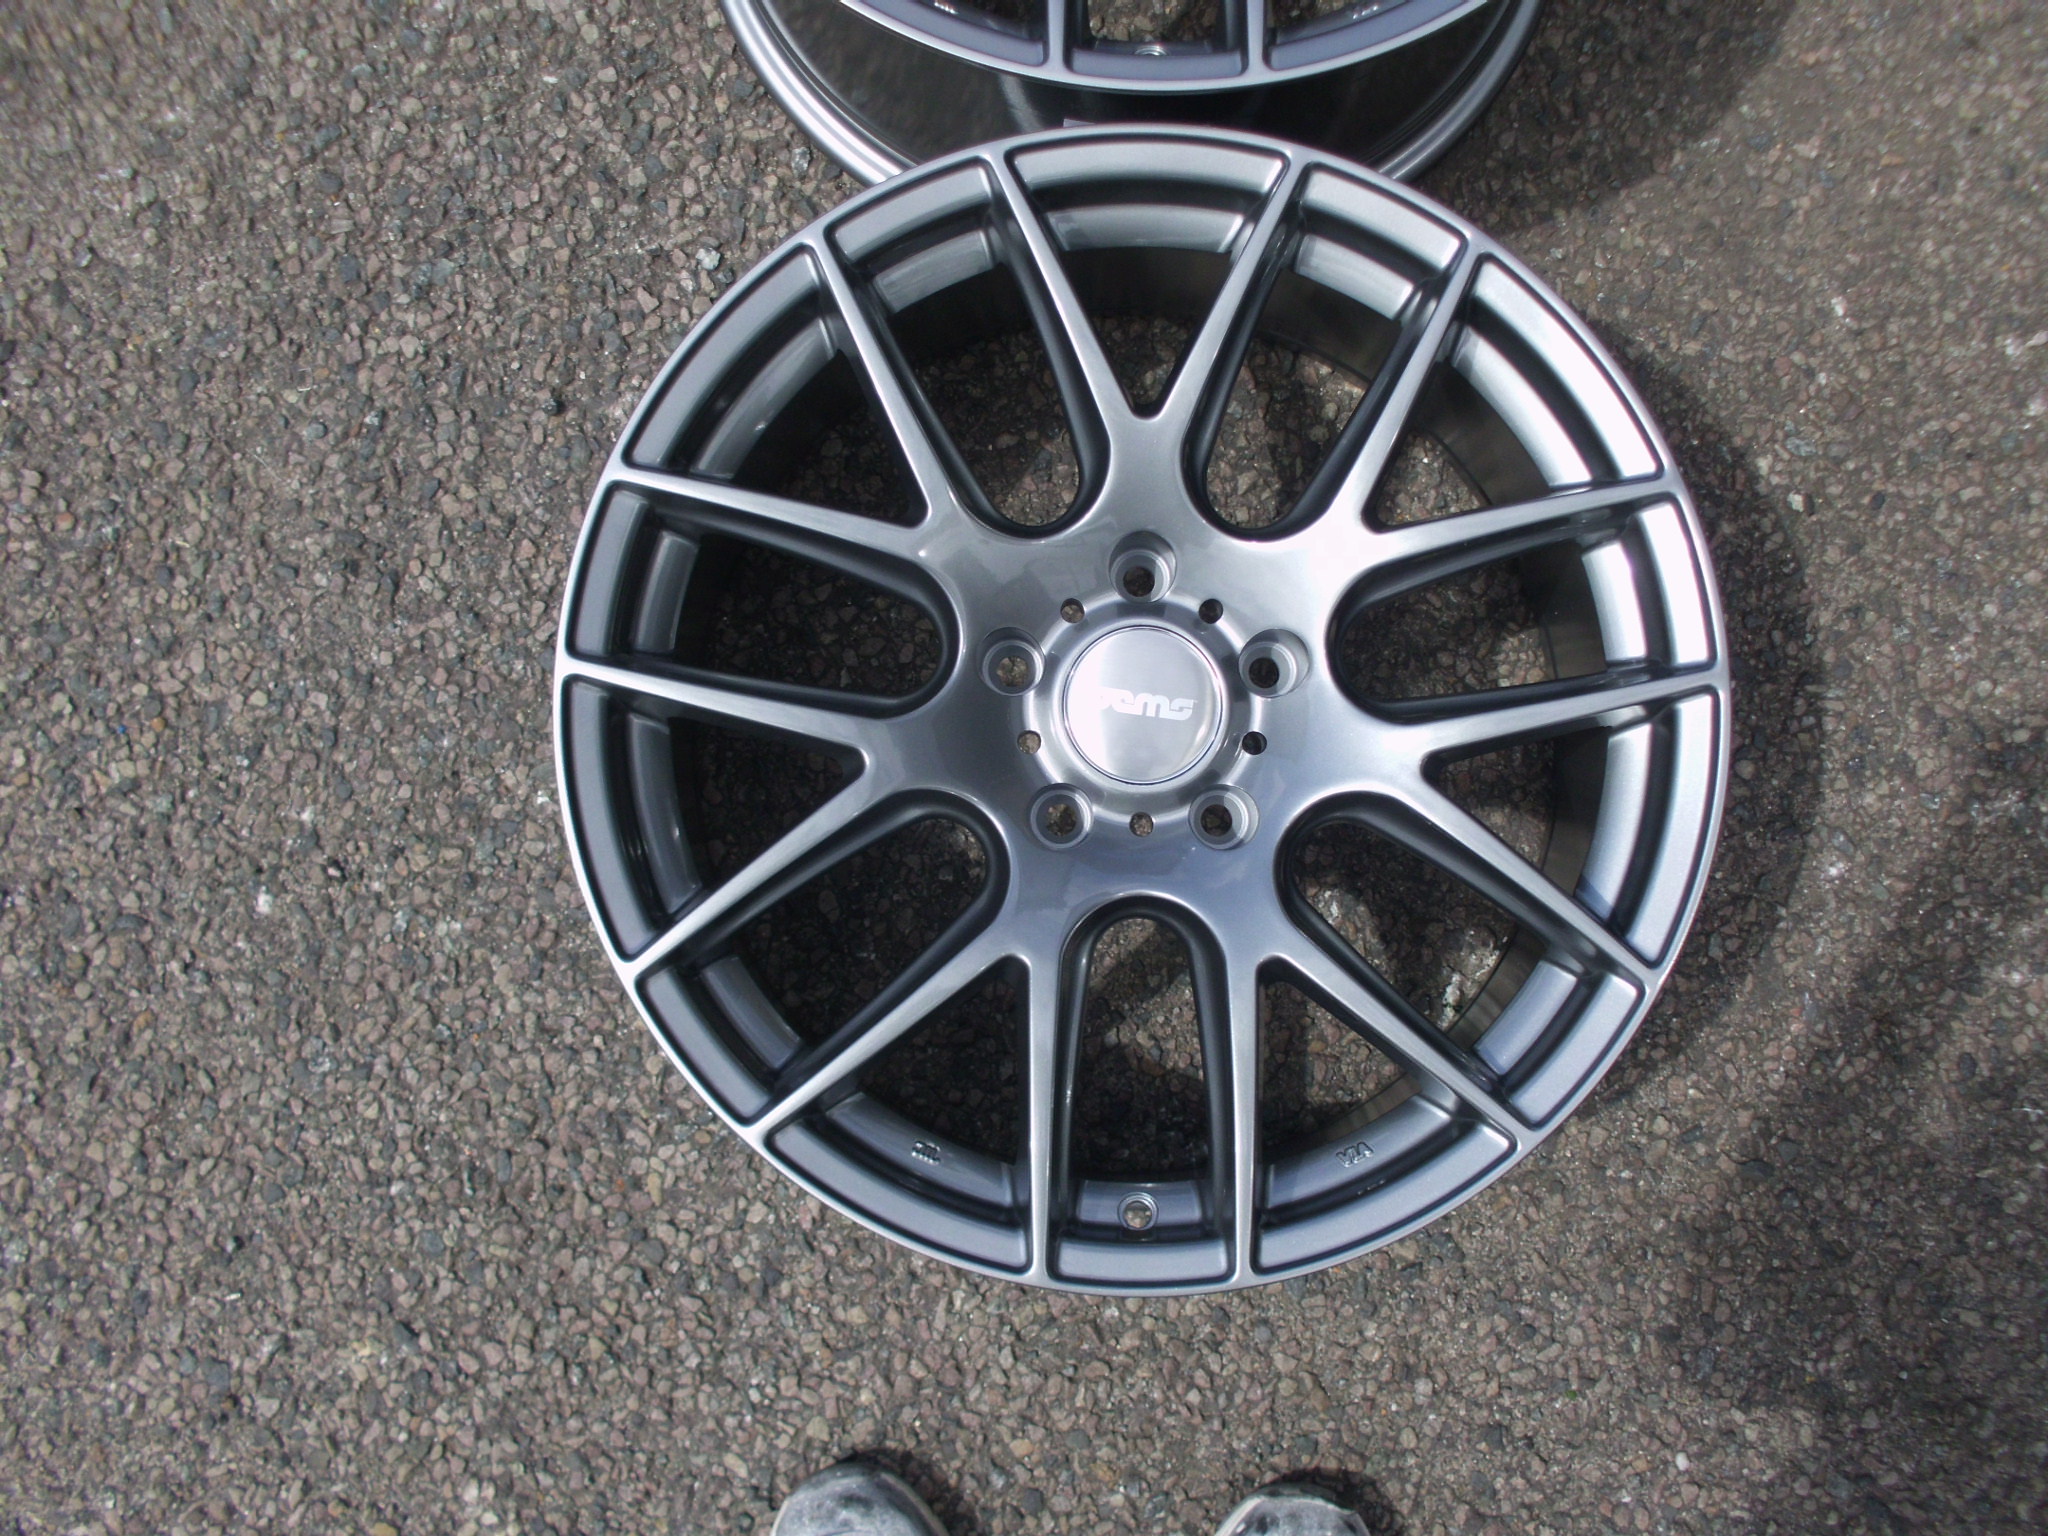 NEW 18" OEMS 111 ALLOY WHEELS IN GLOSS GUNMETAL WITH WIDER 9.5" REARS